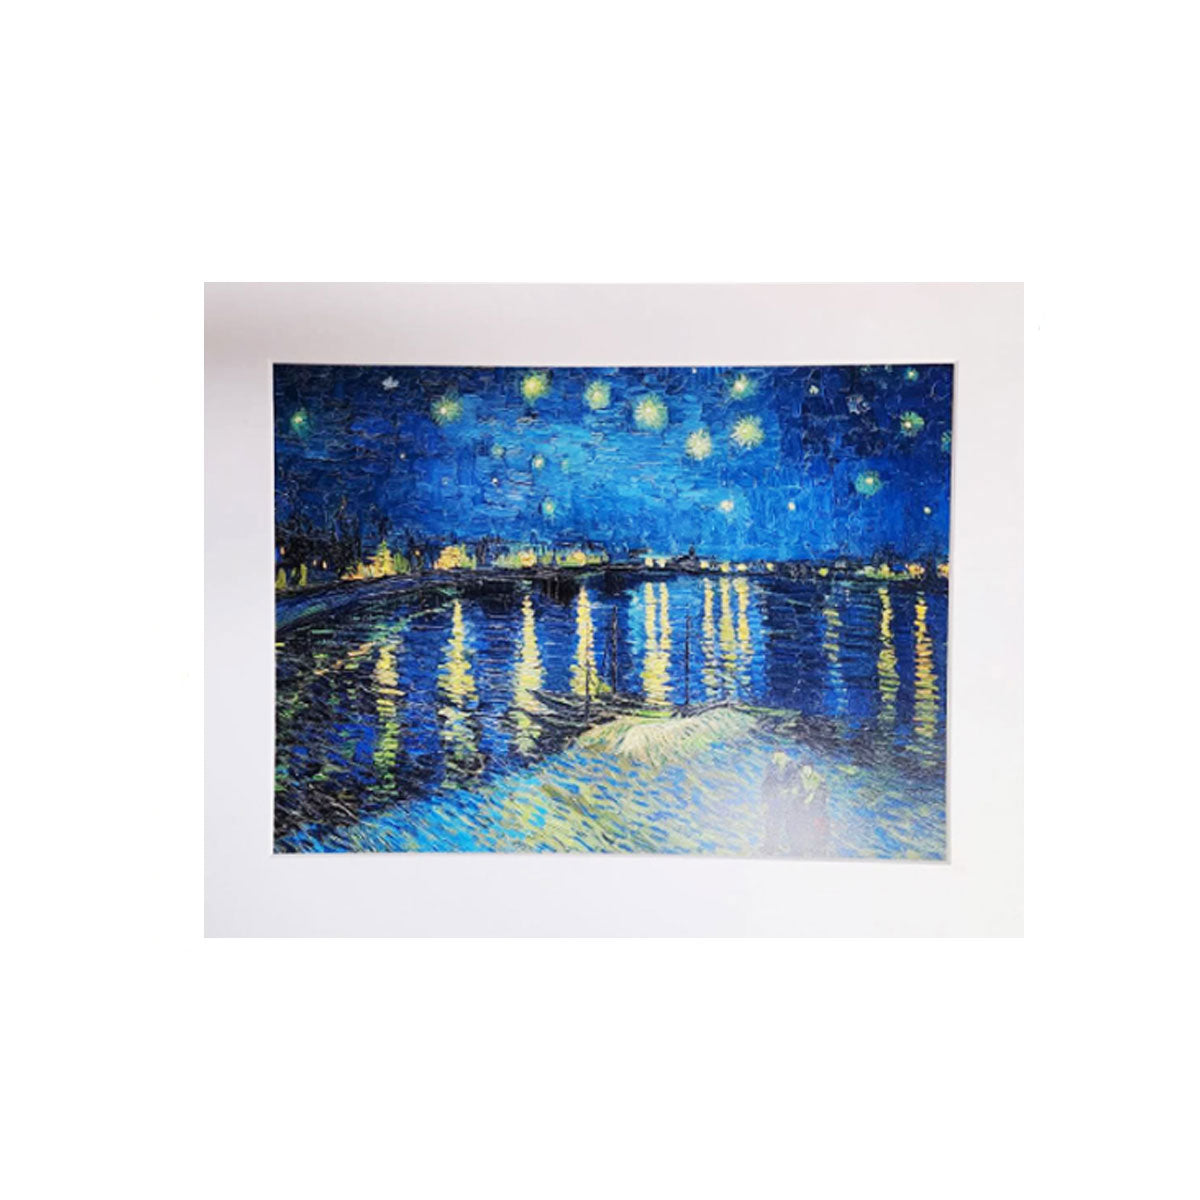 Starry Night Over the Rhone Matted Print 11x14